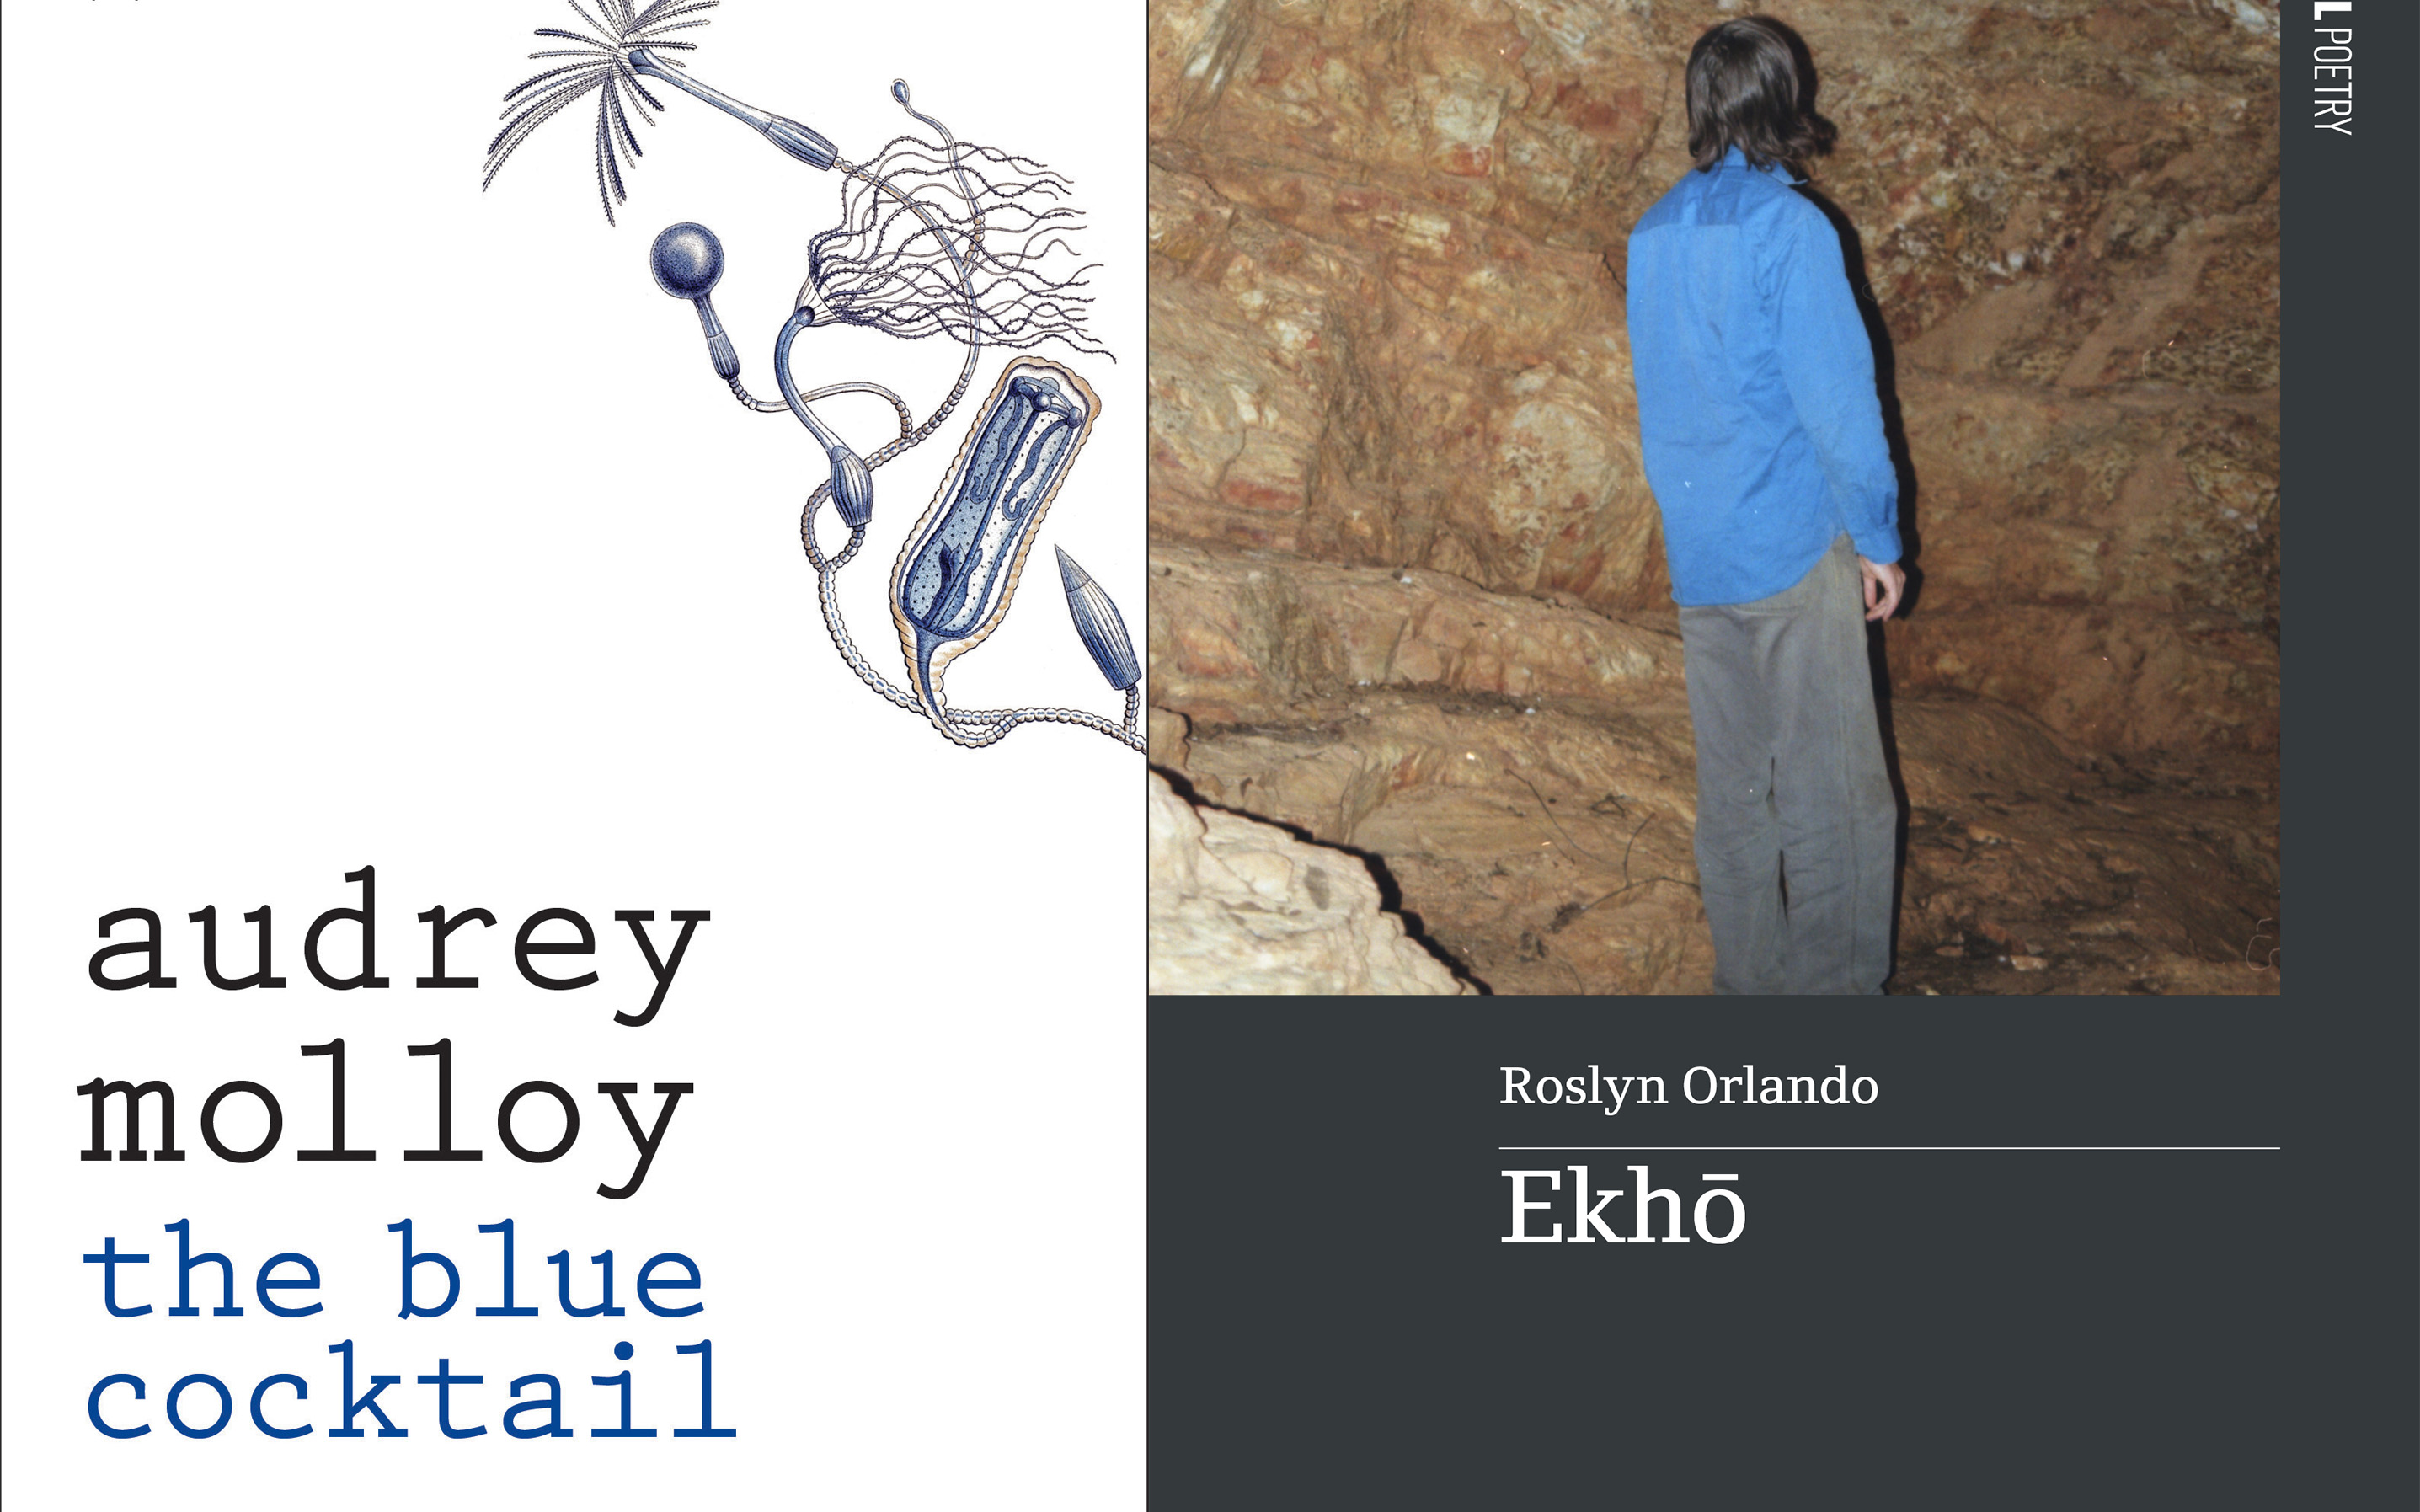 Sam Ryan reviews ‘The Blue Cocktail’ by Audrey Molloy and ‘Ekhō’ by Roslyn Orlando